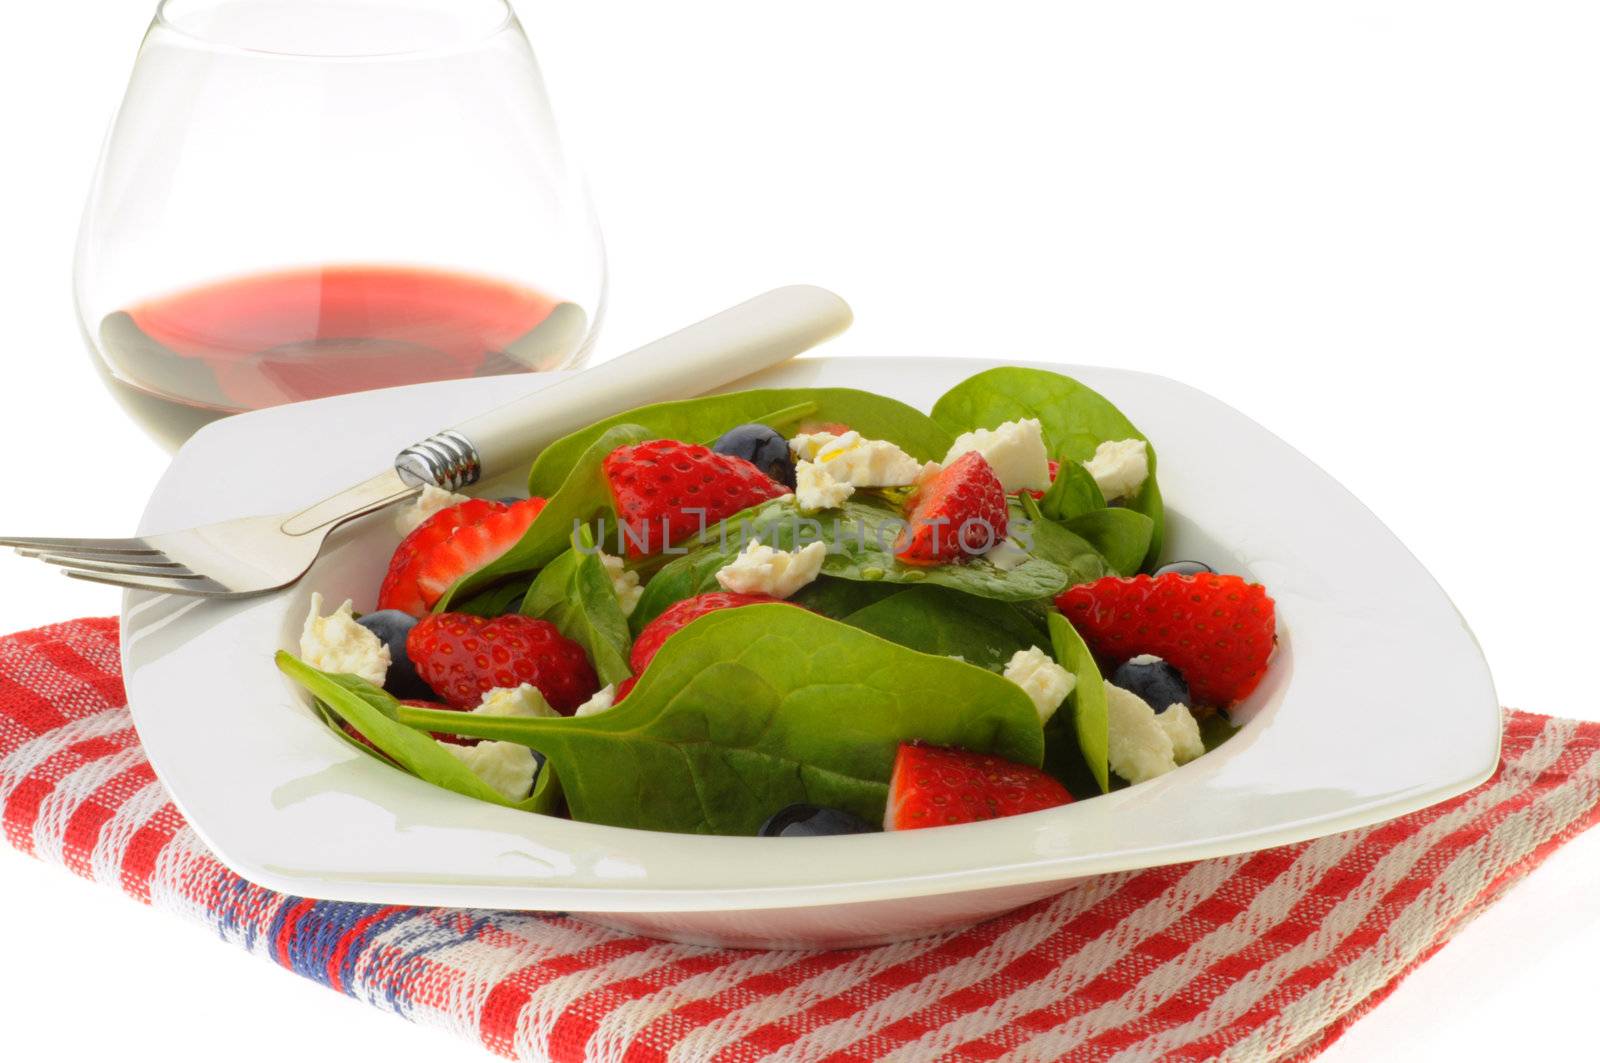 Colorful salad with strawberry, blueberry and feta.